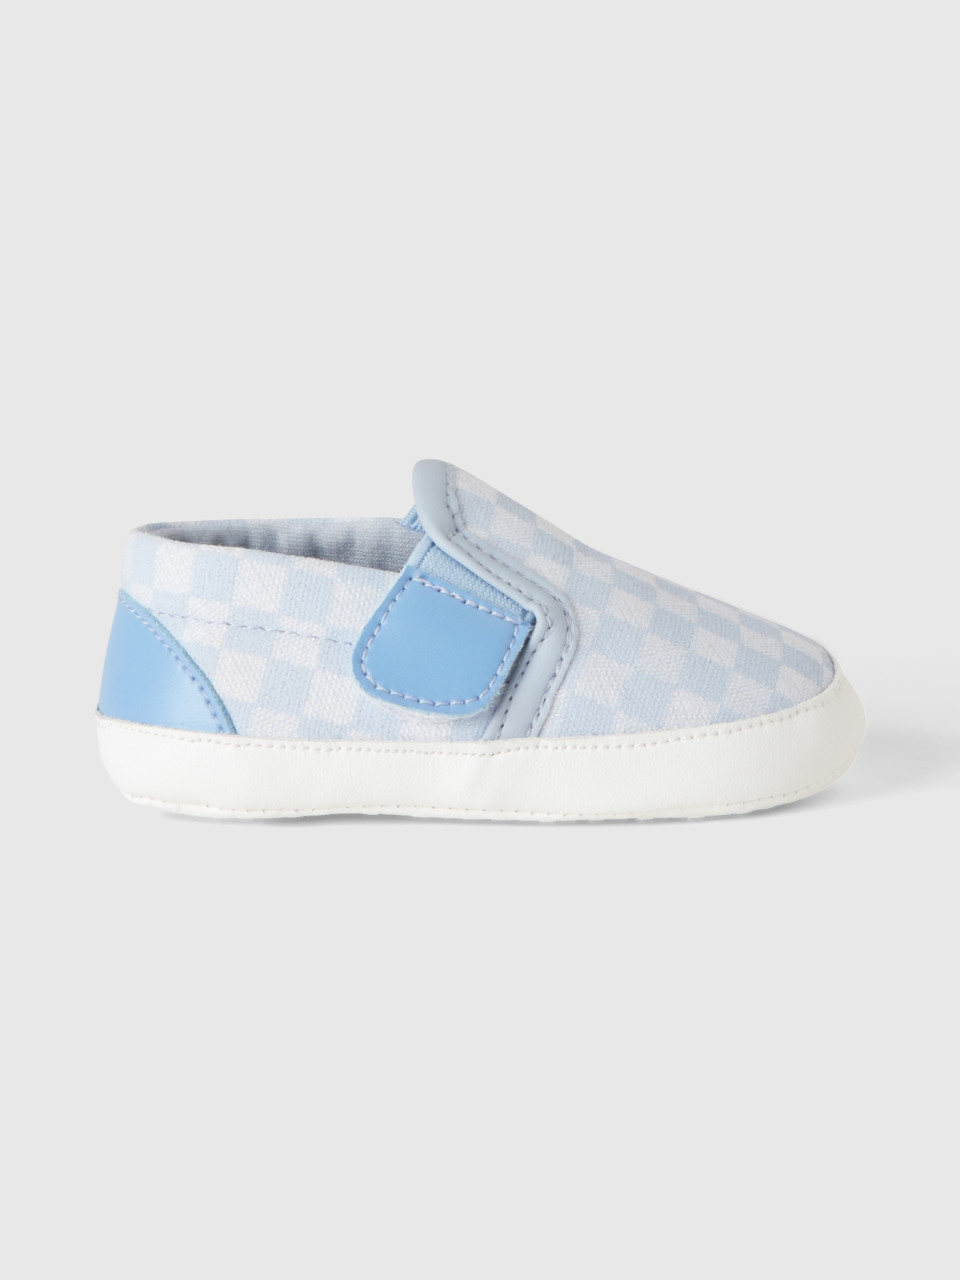 Benetton, First Steps Slip-on Shoes,5C, Sky Blue